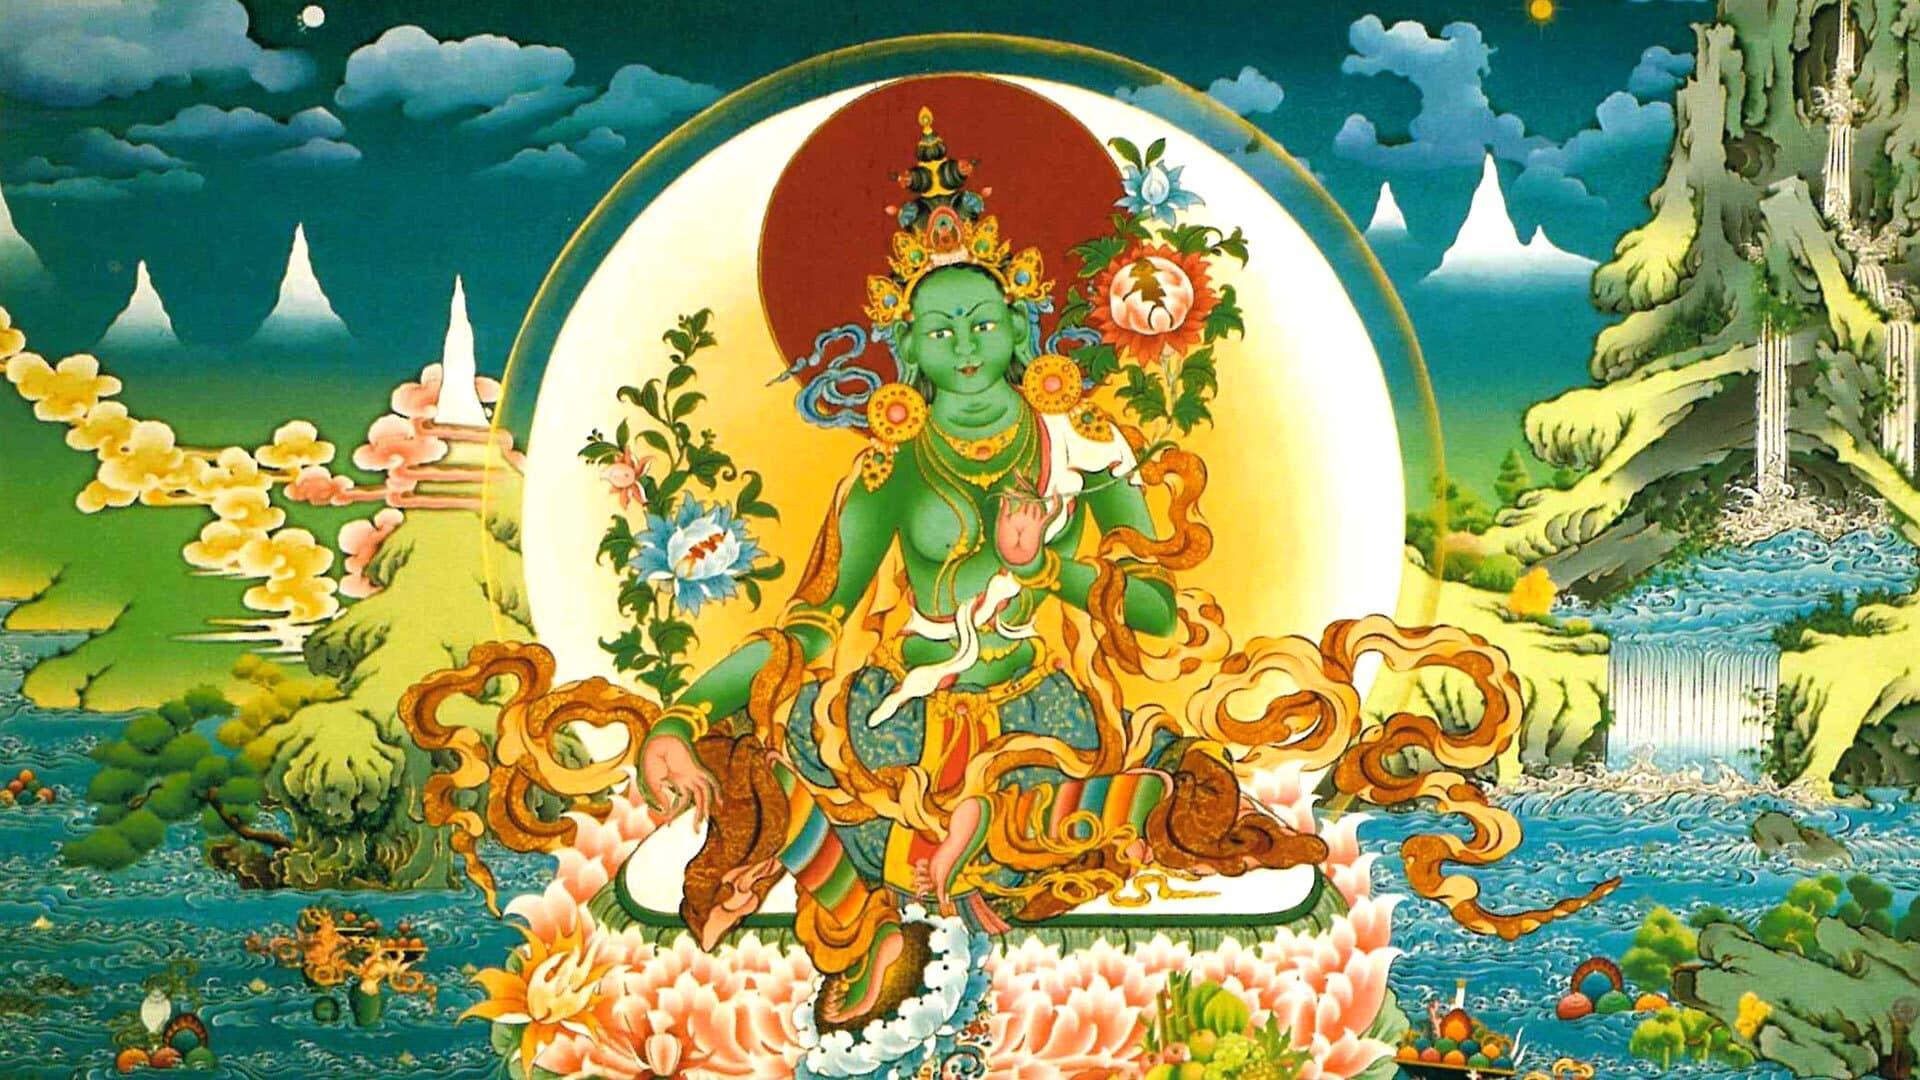 Exploring Our Goodness: Green Tara and the 6 Perfections